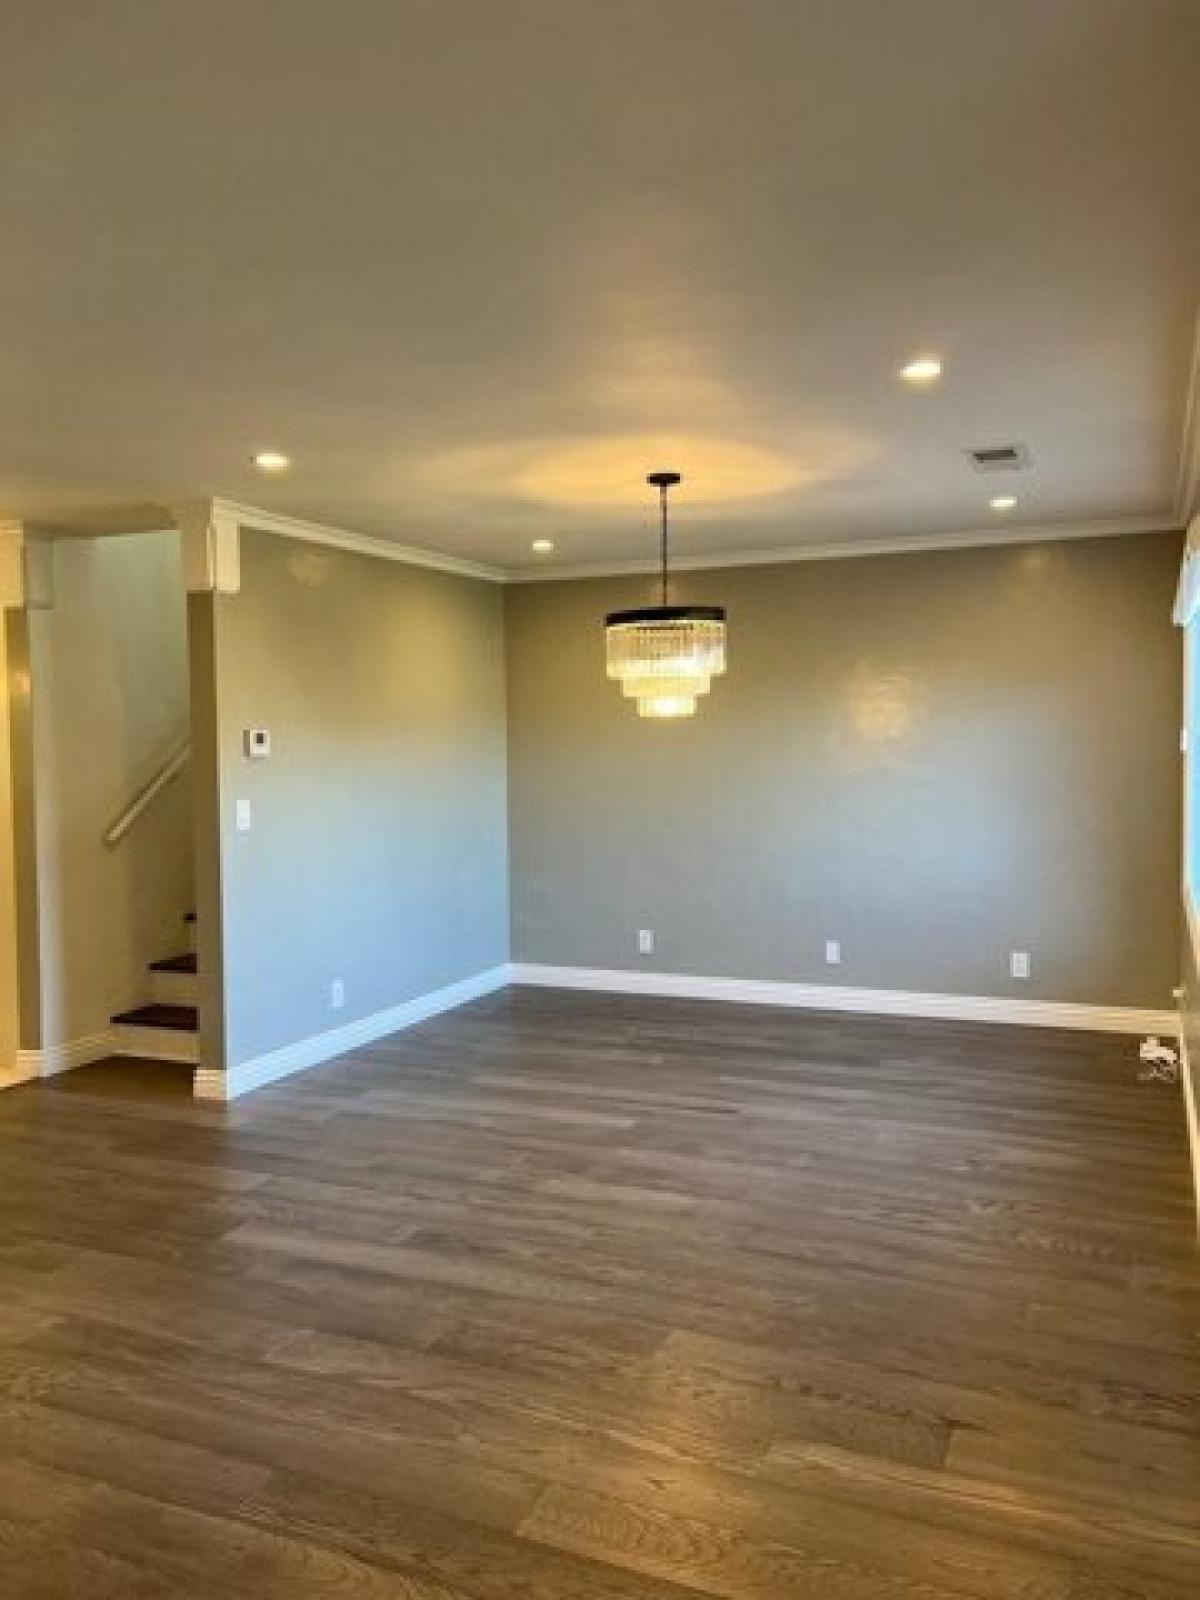 Picture of Home For Rent in Belmont, California, United States